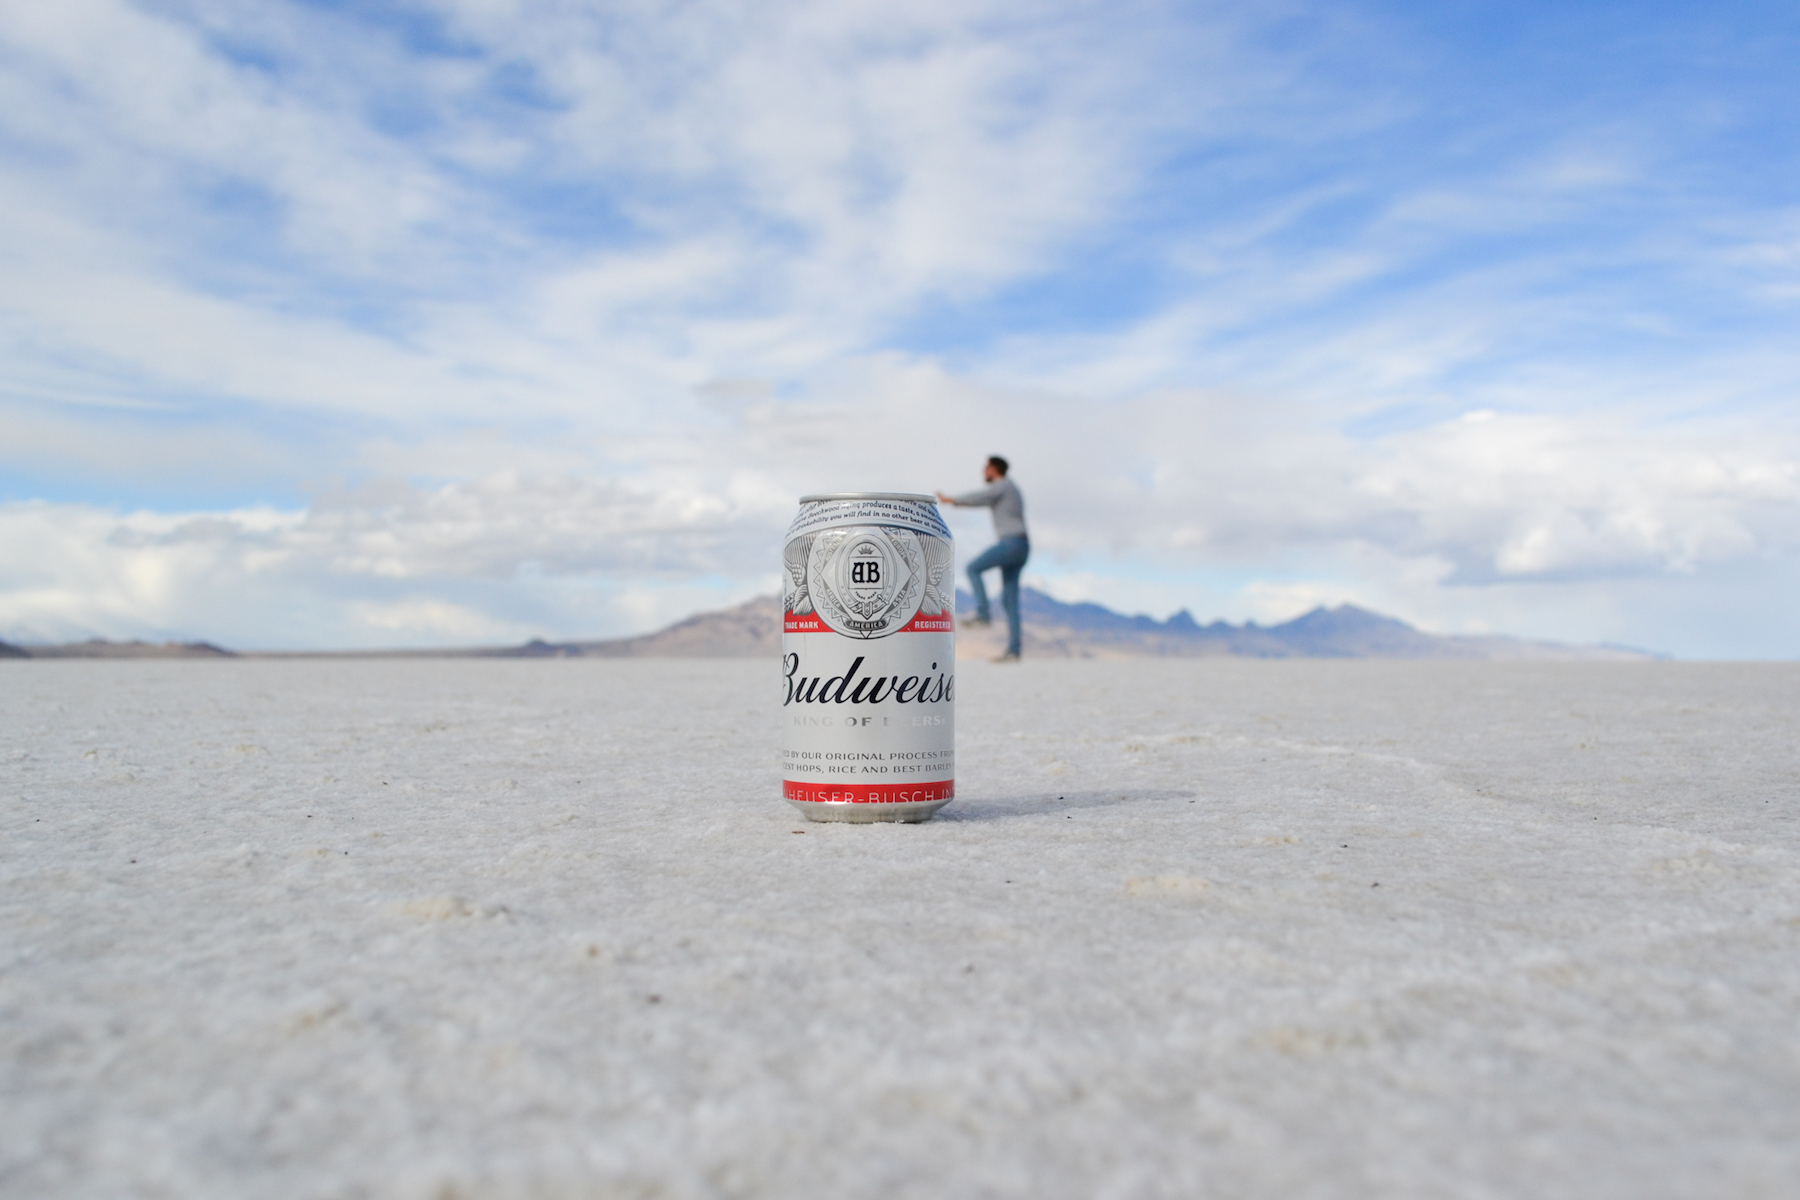 Beer can perspective on the salt flats.